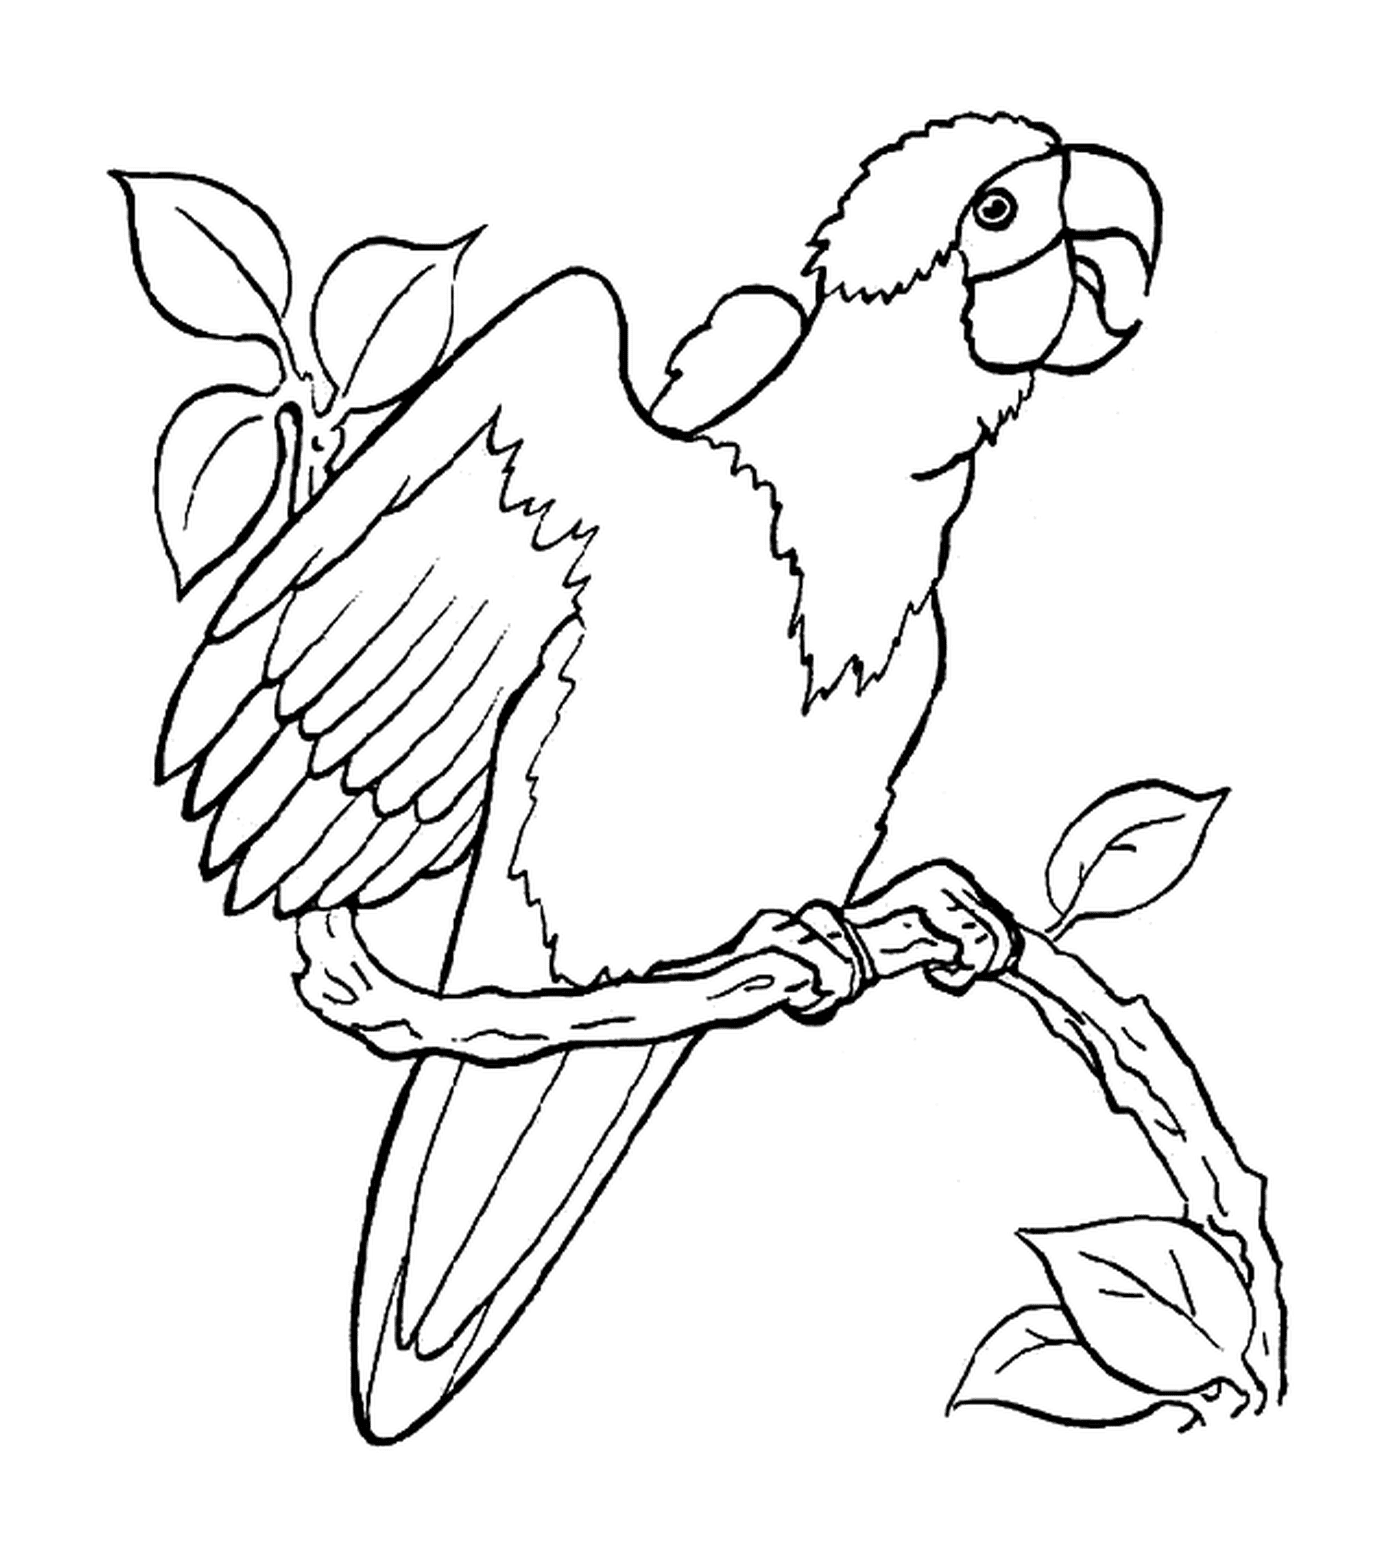  Parrot on a branch 